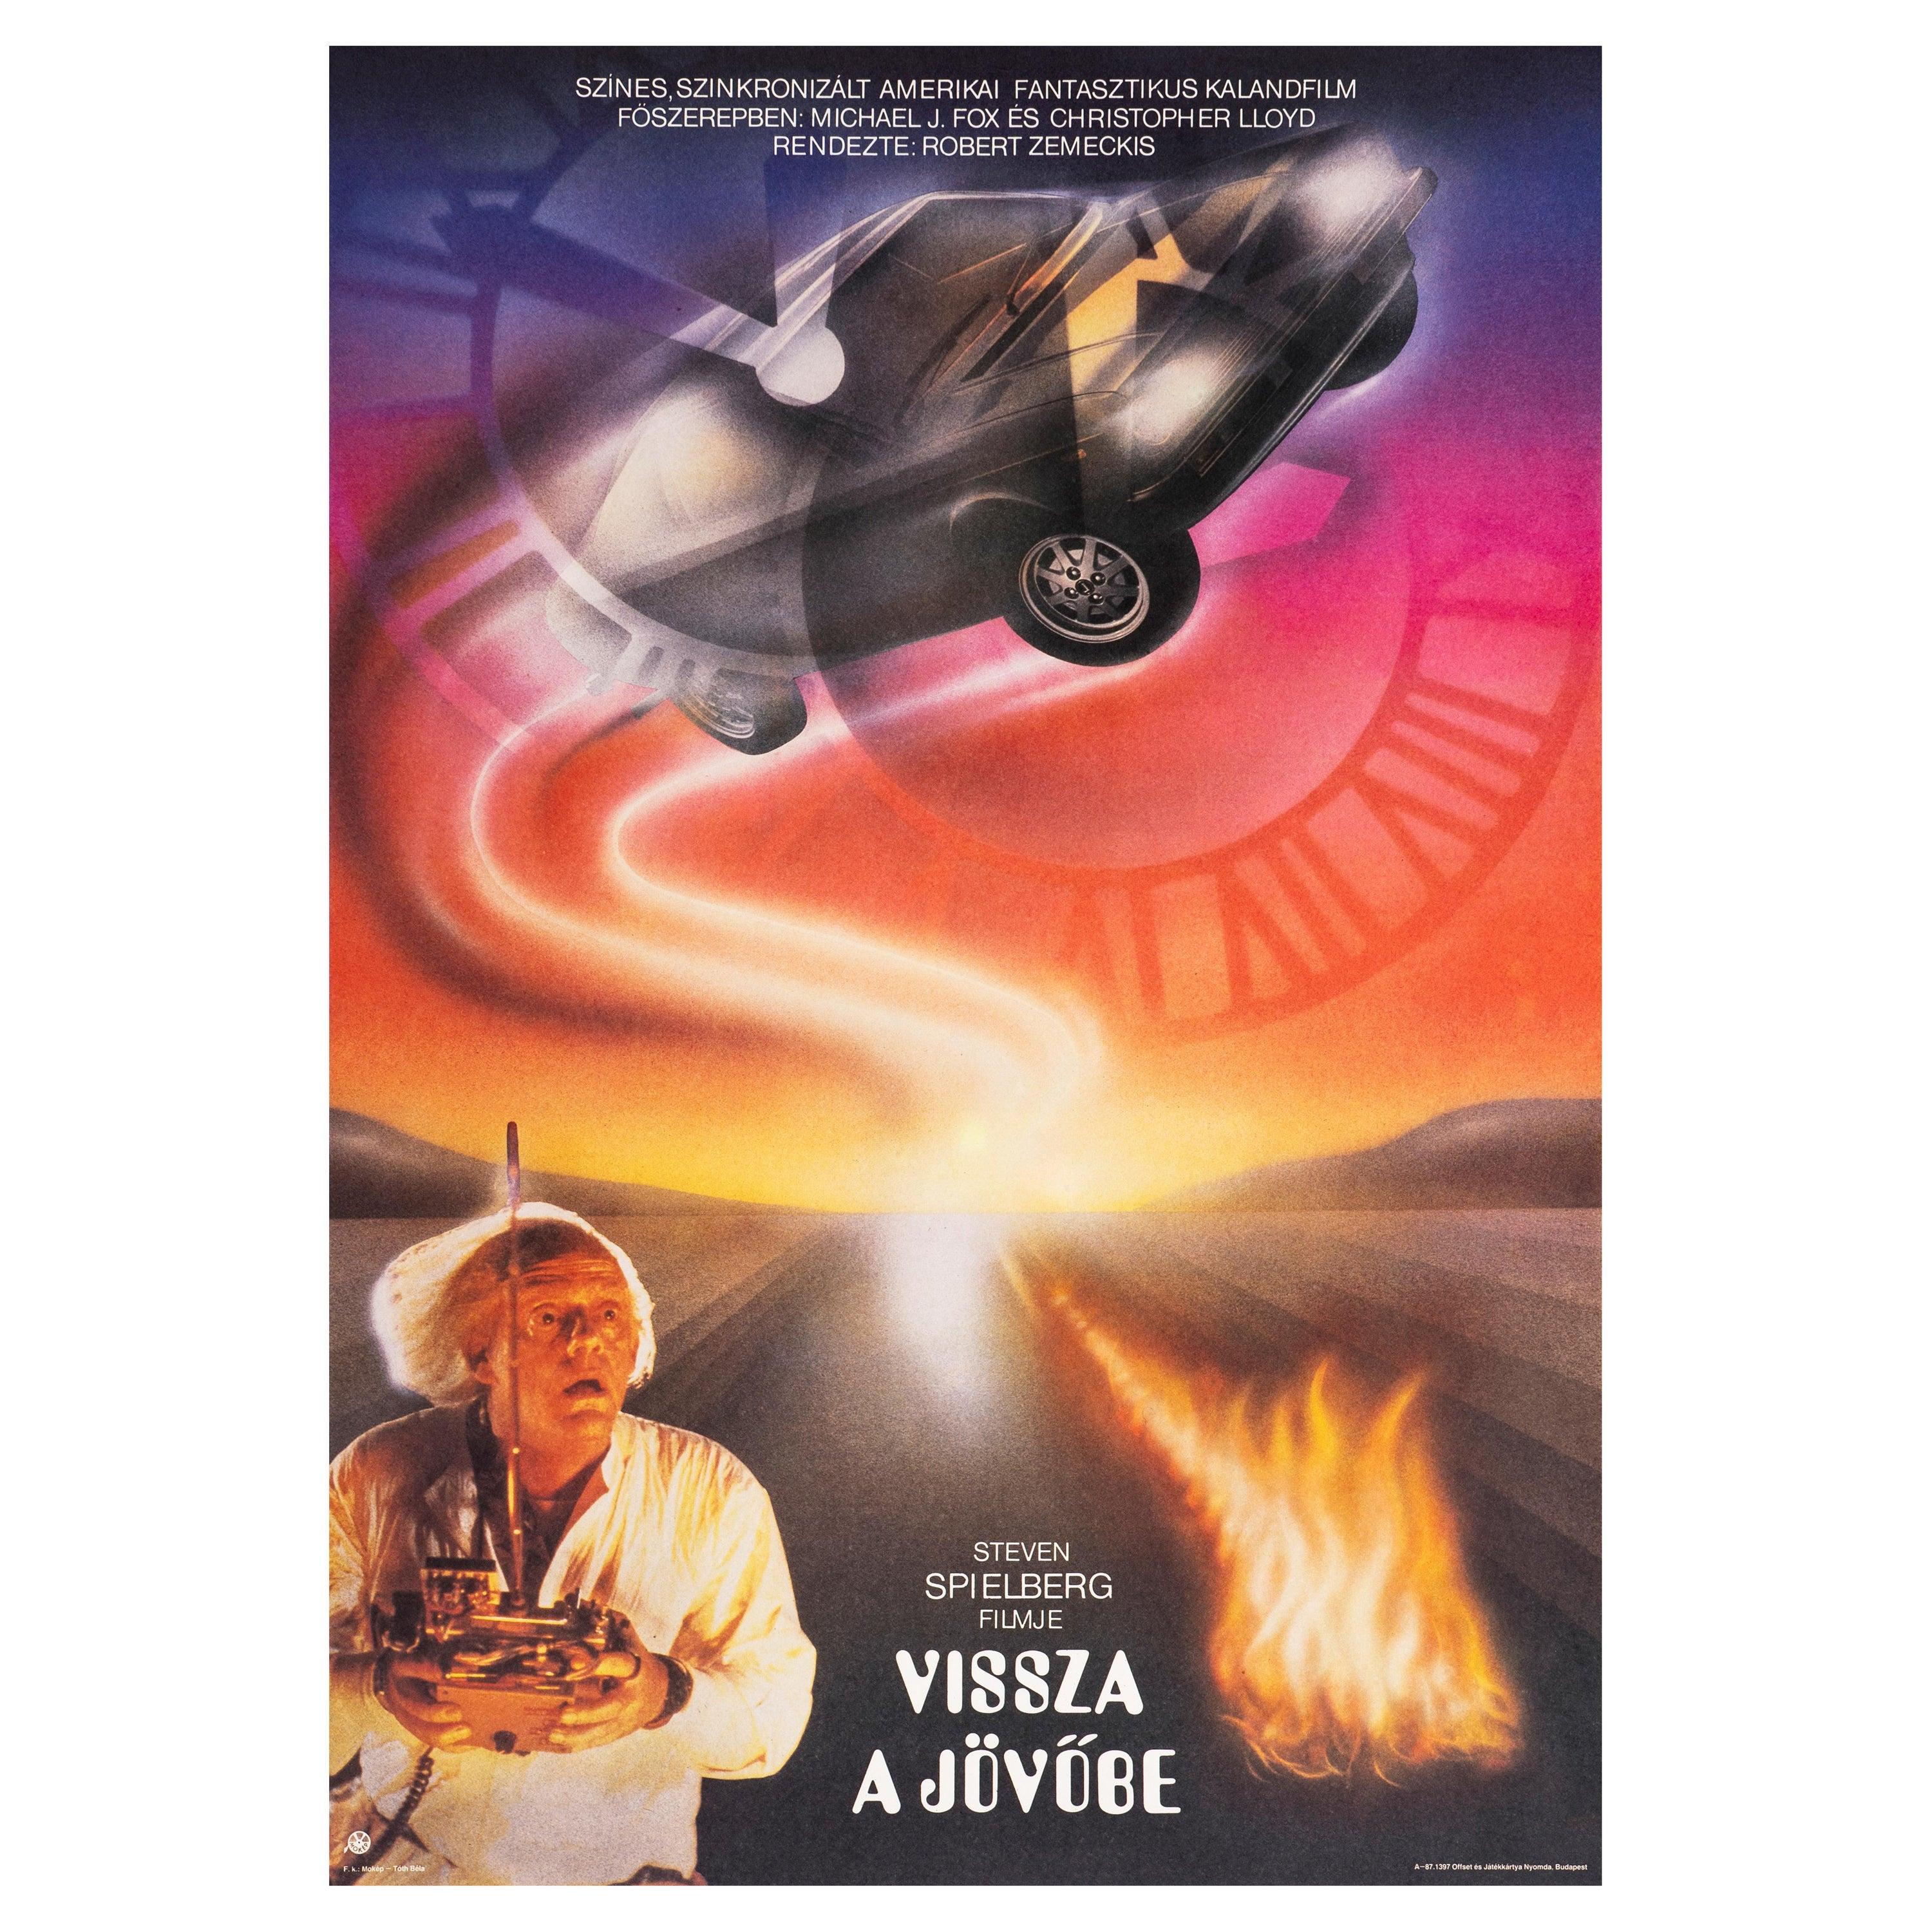 Unknown Print - "Back to the Future" Original Vintage Movie Poster, Hungarian, 1987